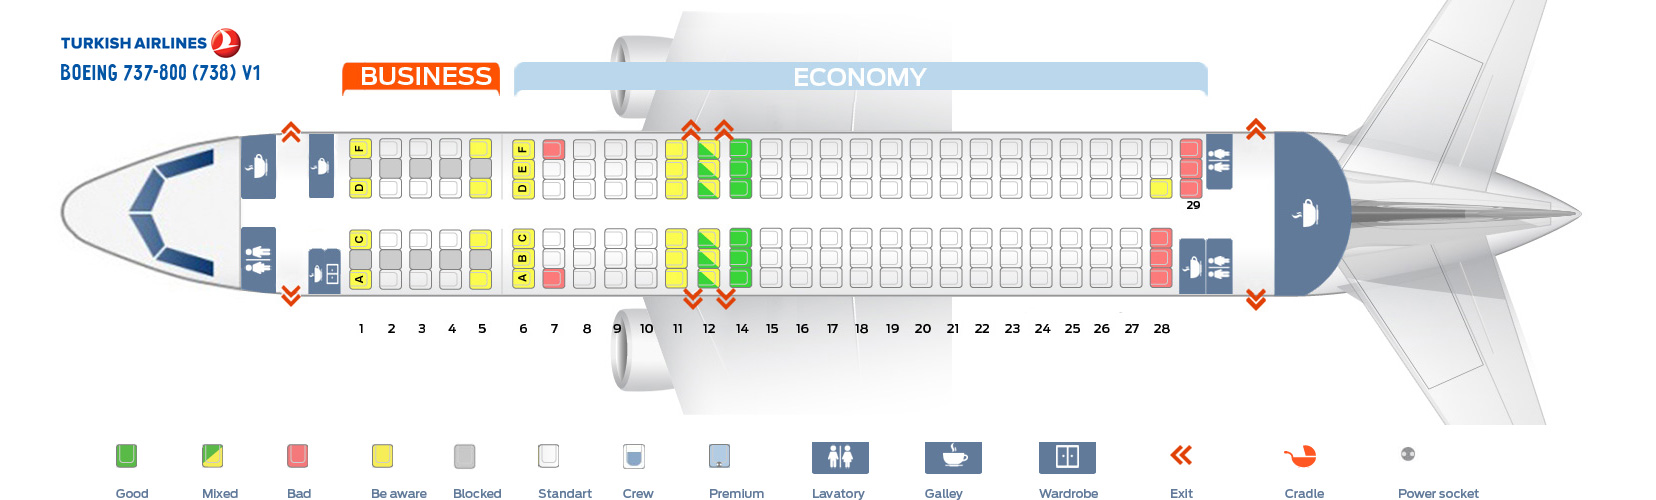 Boeing 737 800 Winglets Seating Chart